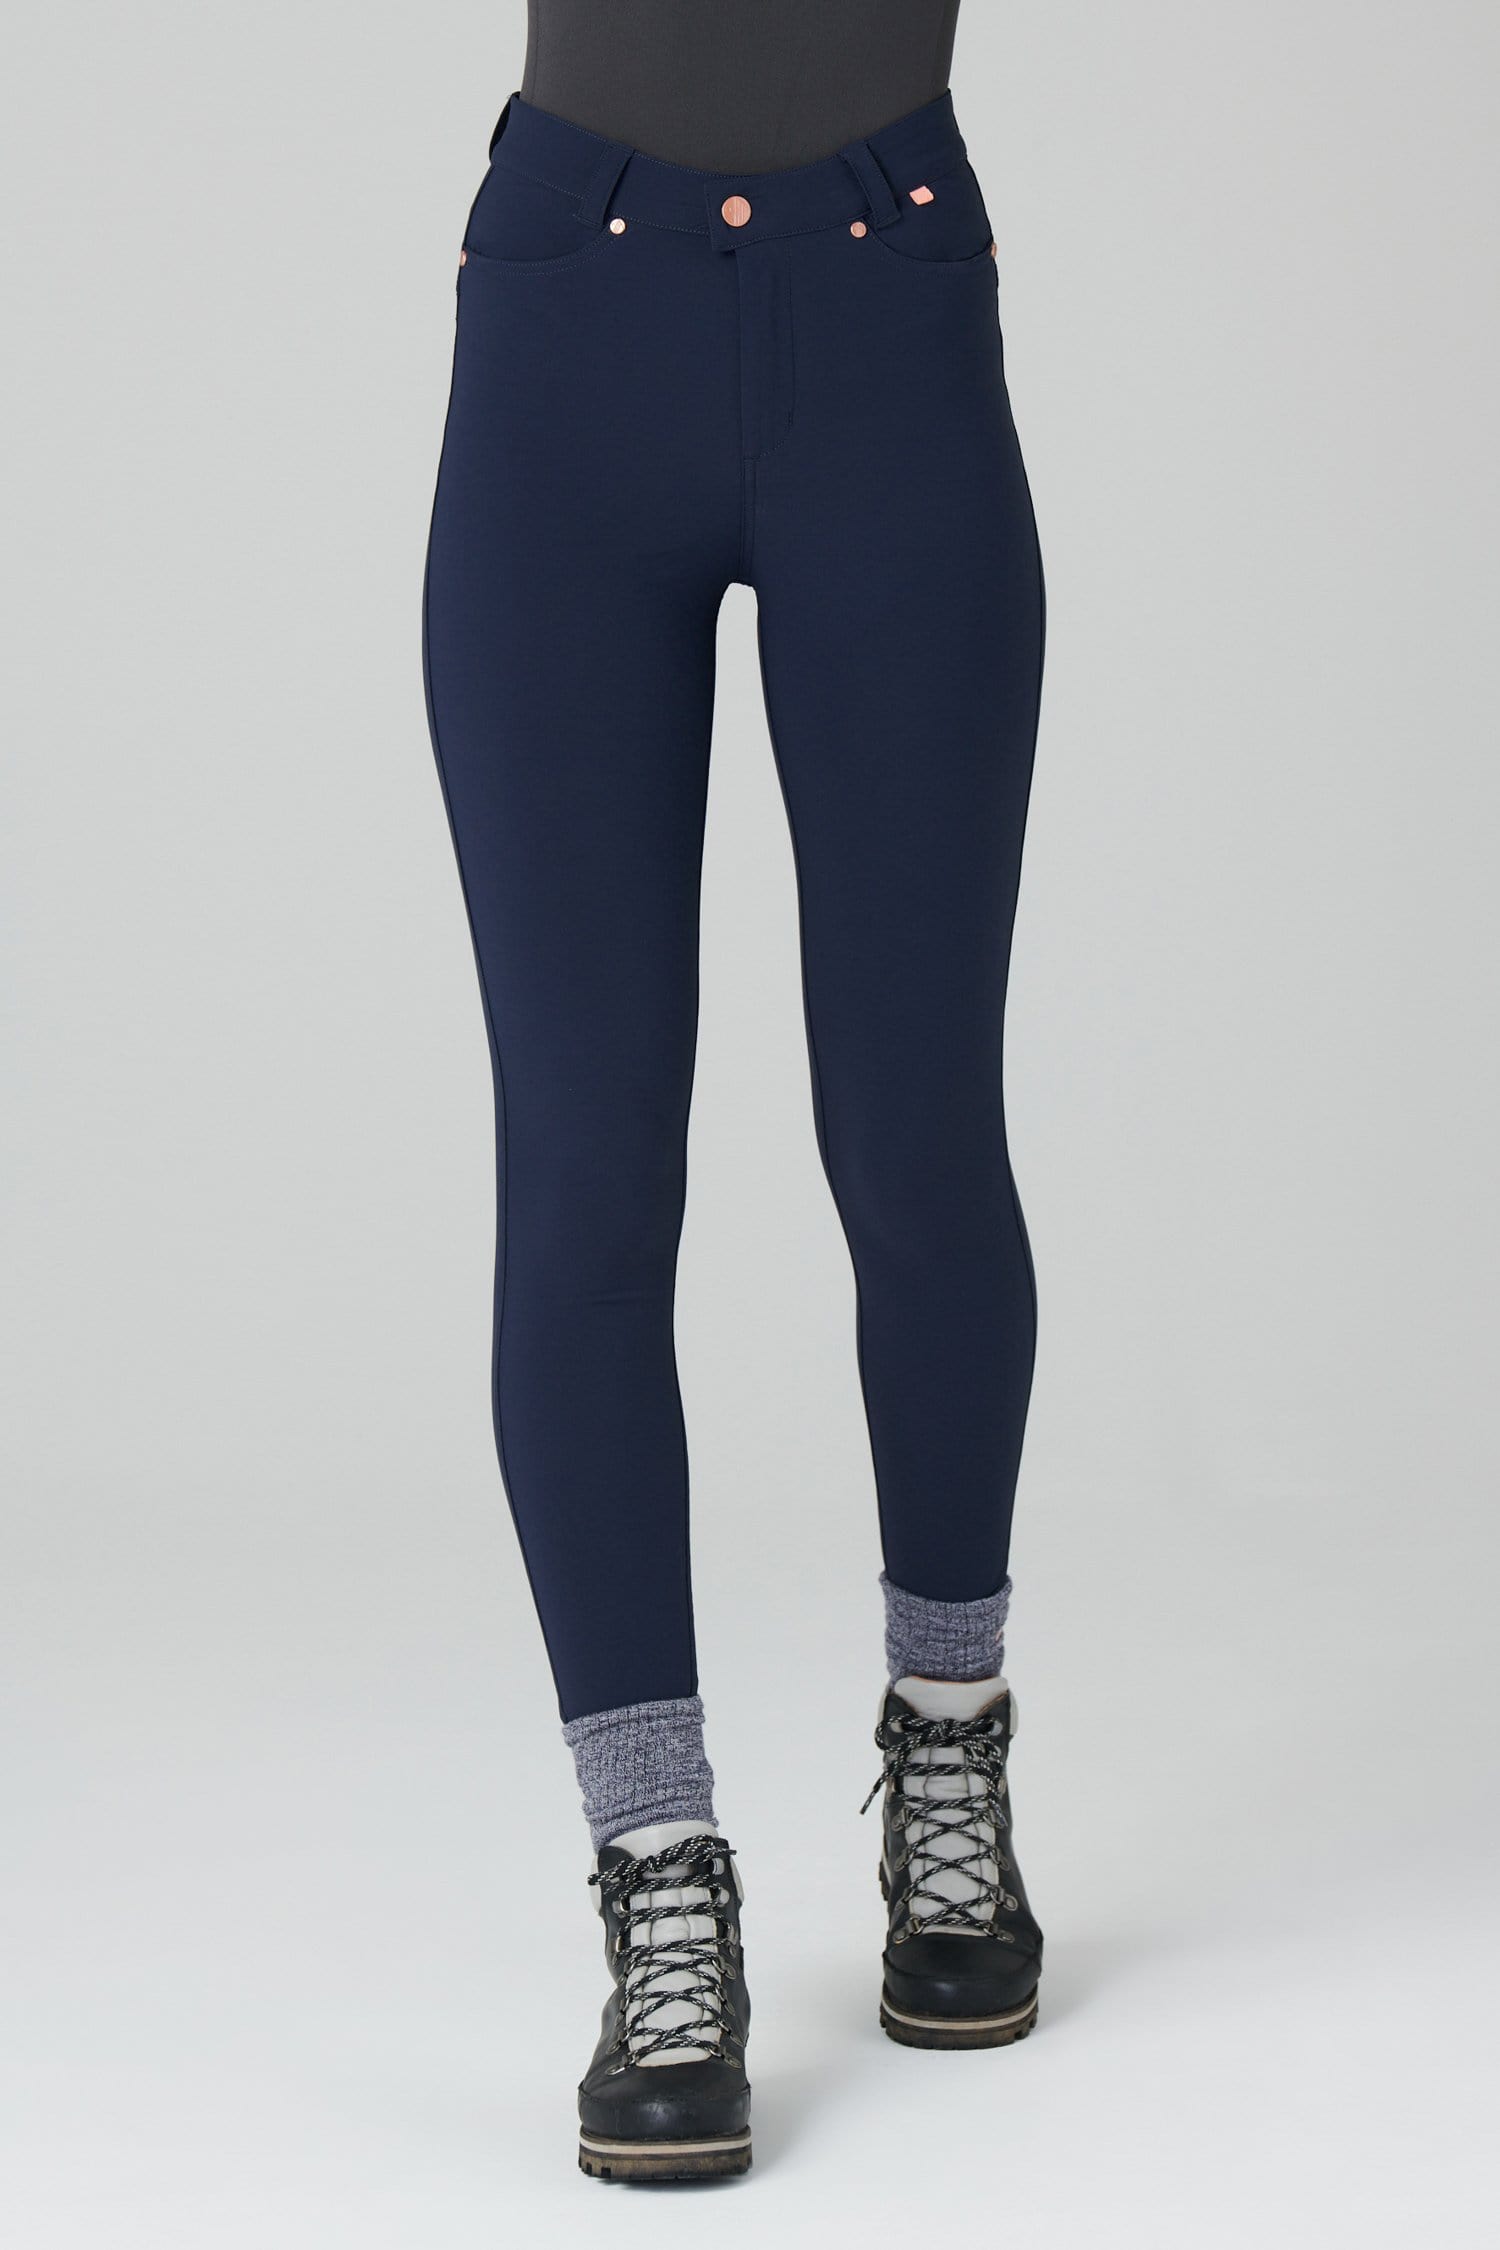 Max Stretch Skinny Outdoor Trousers - Deep Navy - 34r / Uk16 - Womens - Acai Outdoorwear